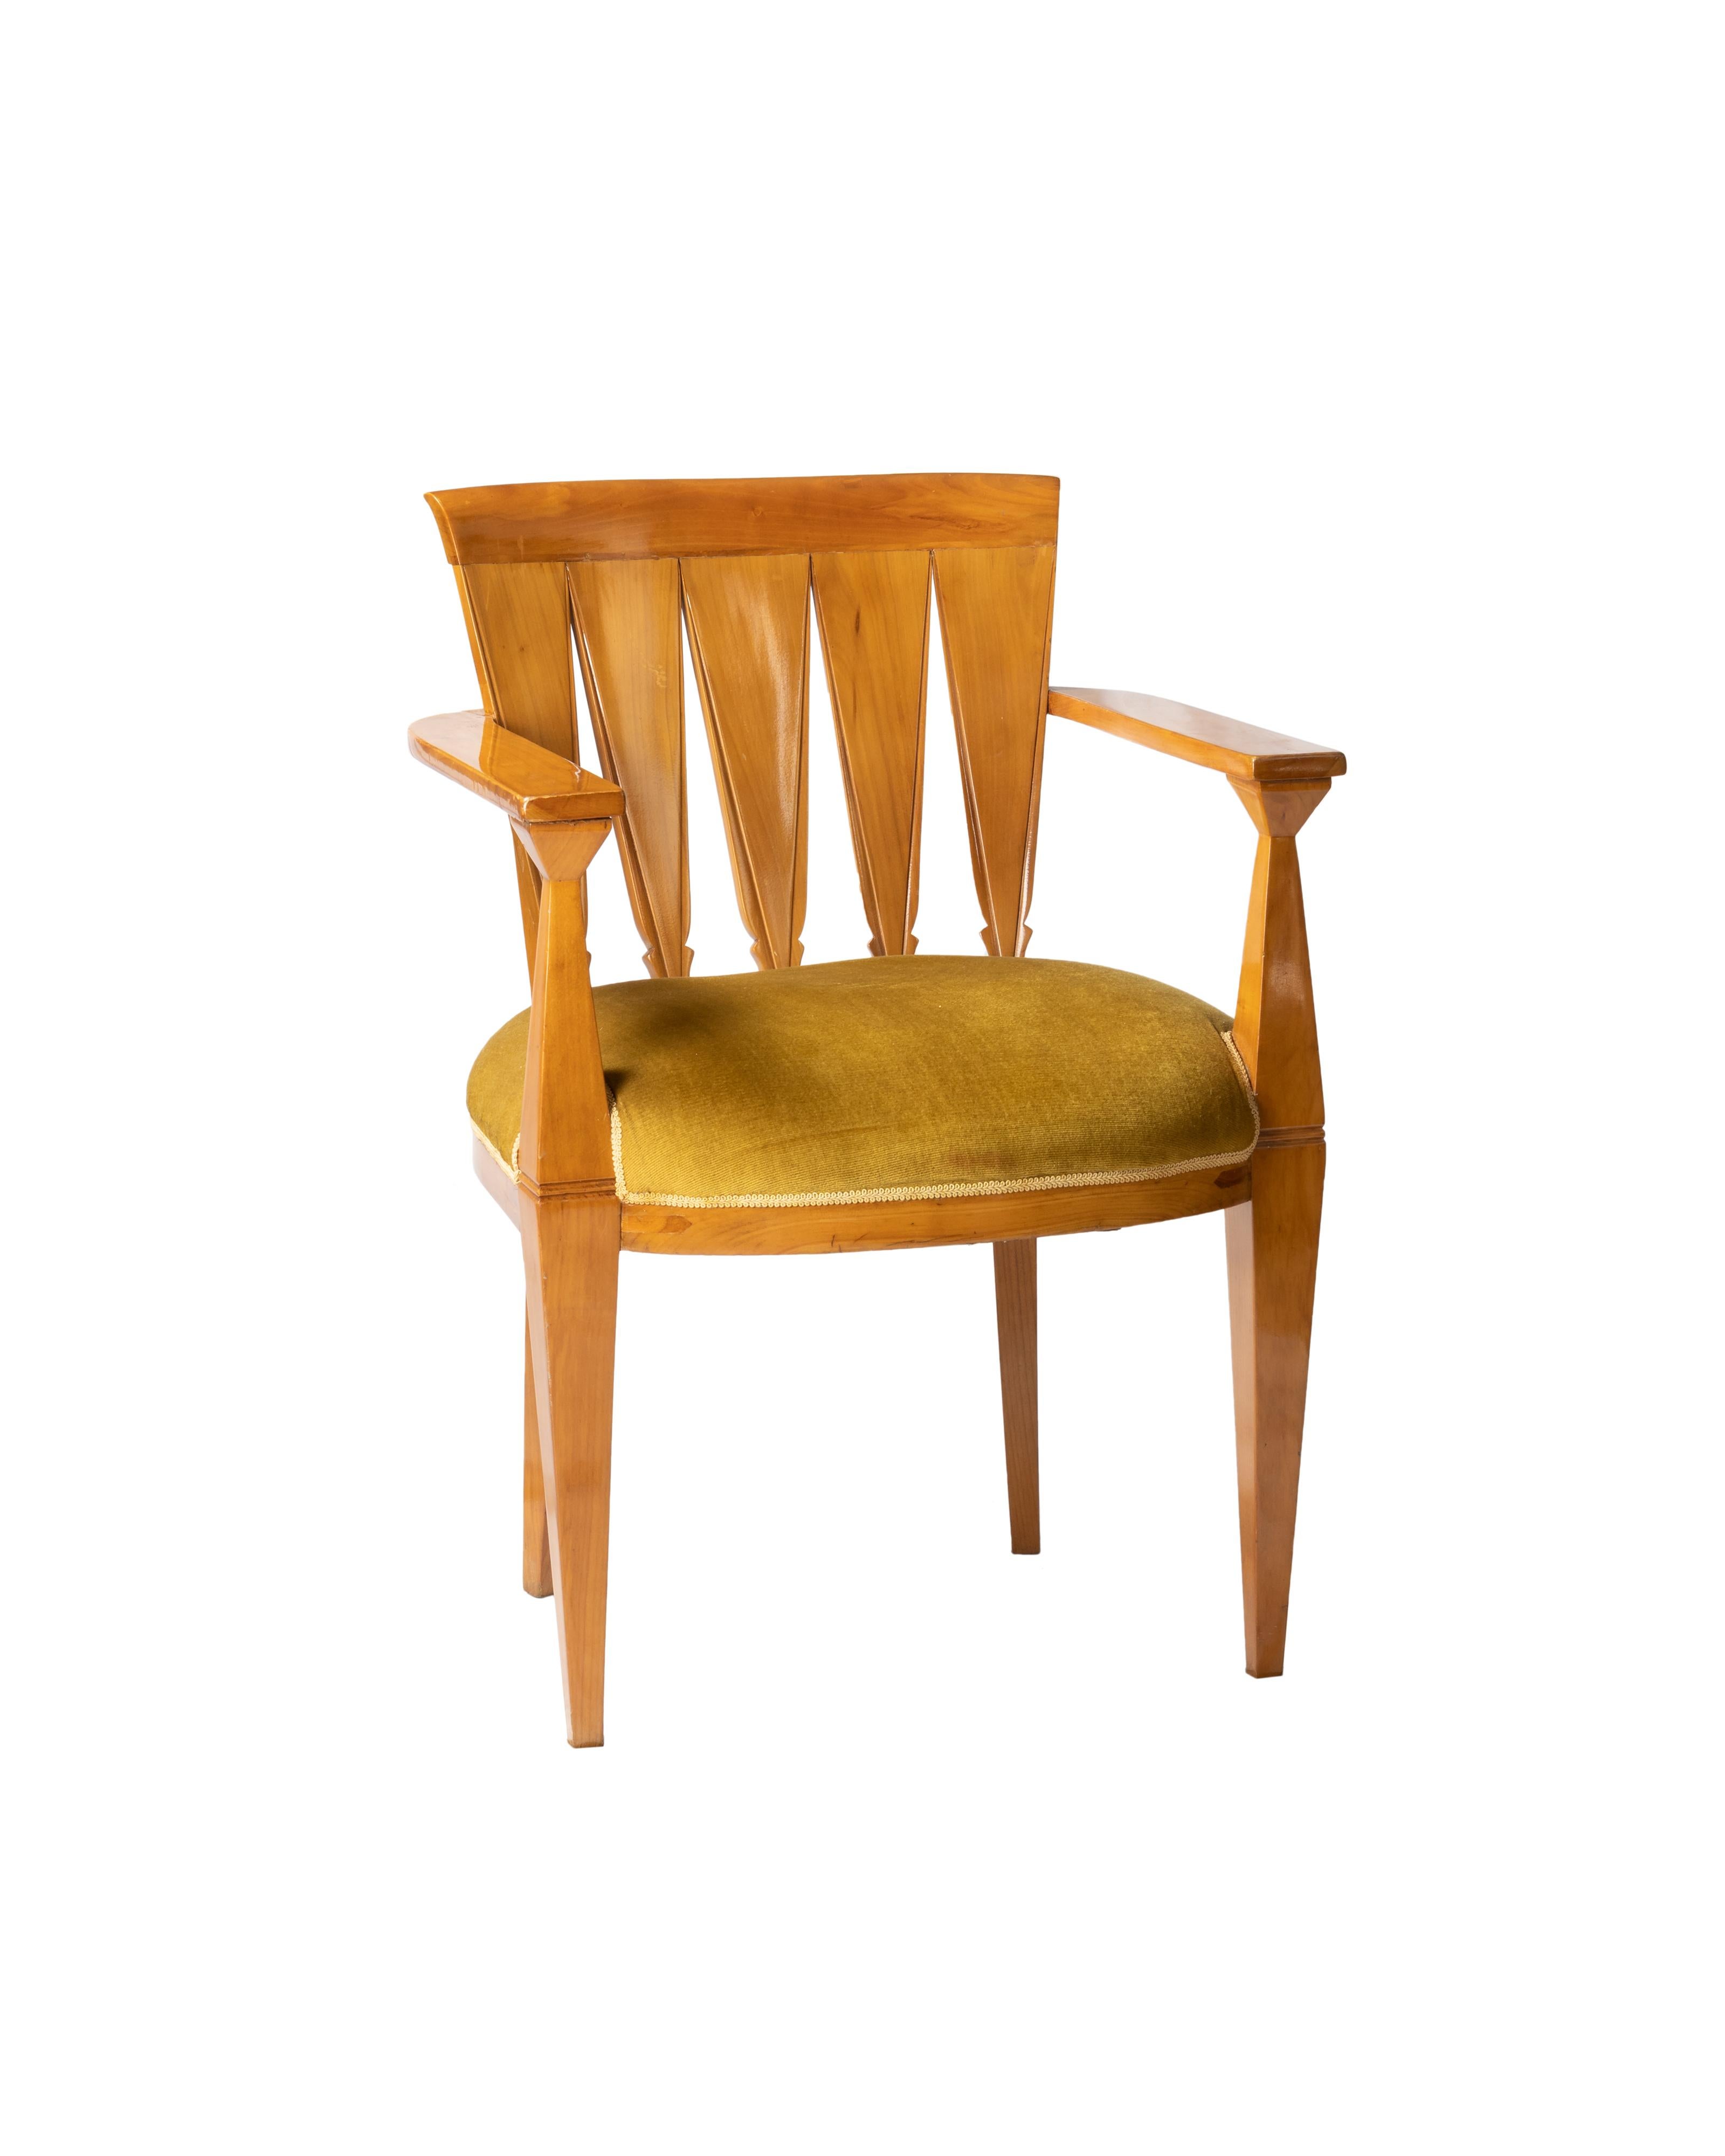 An Art Deco armchair with scalloped wooden backrest, armrests and wide seat, mustard-coloured upholstery.